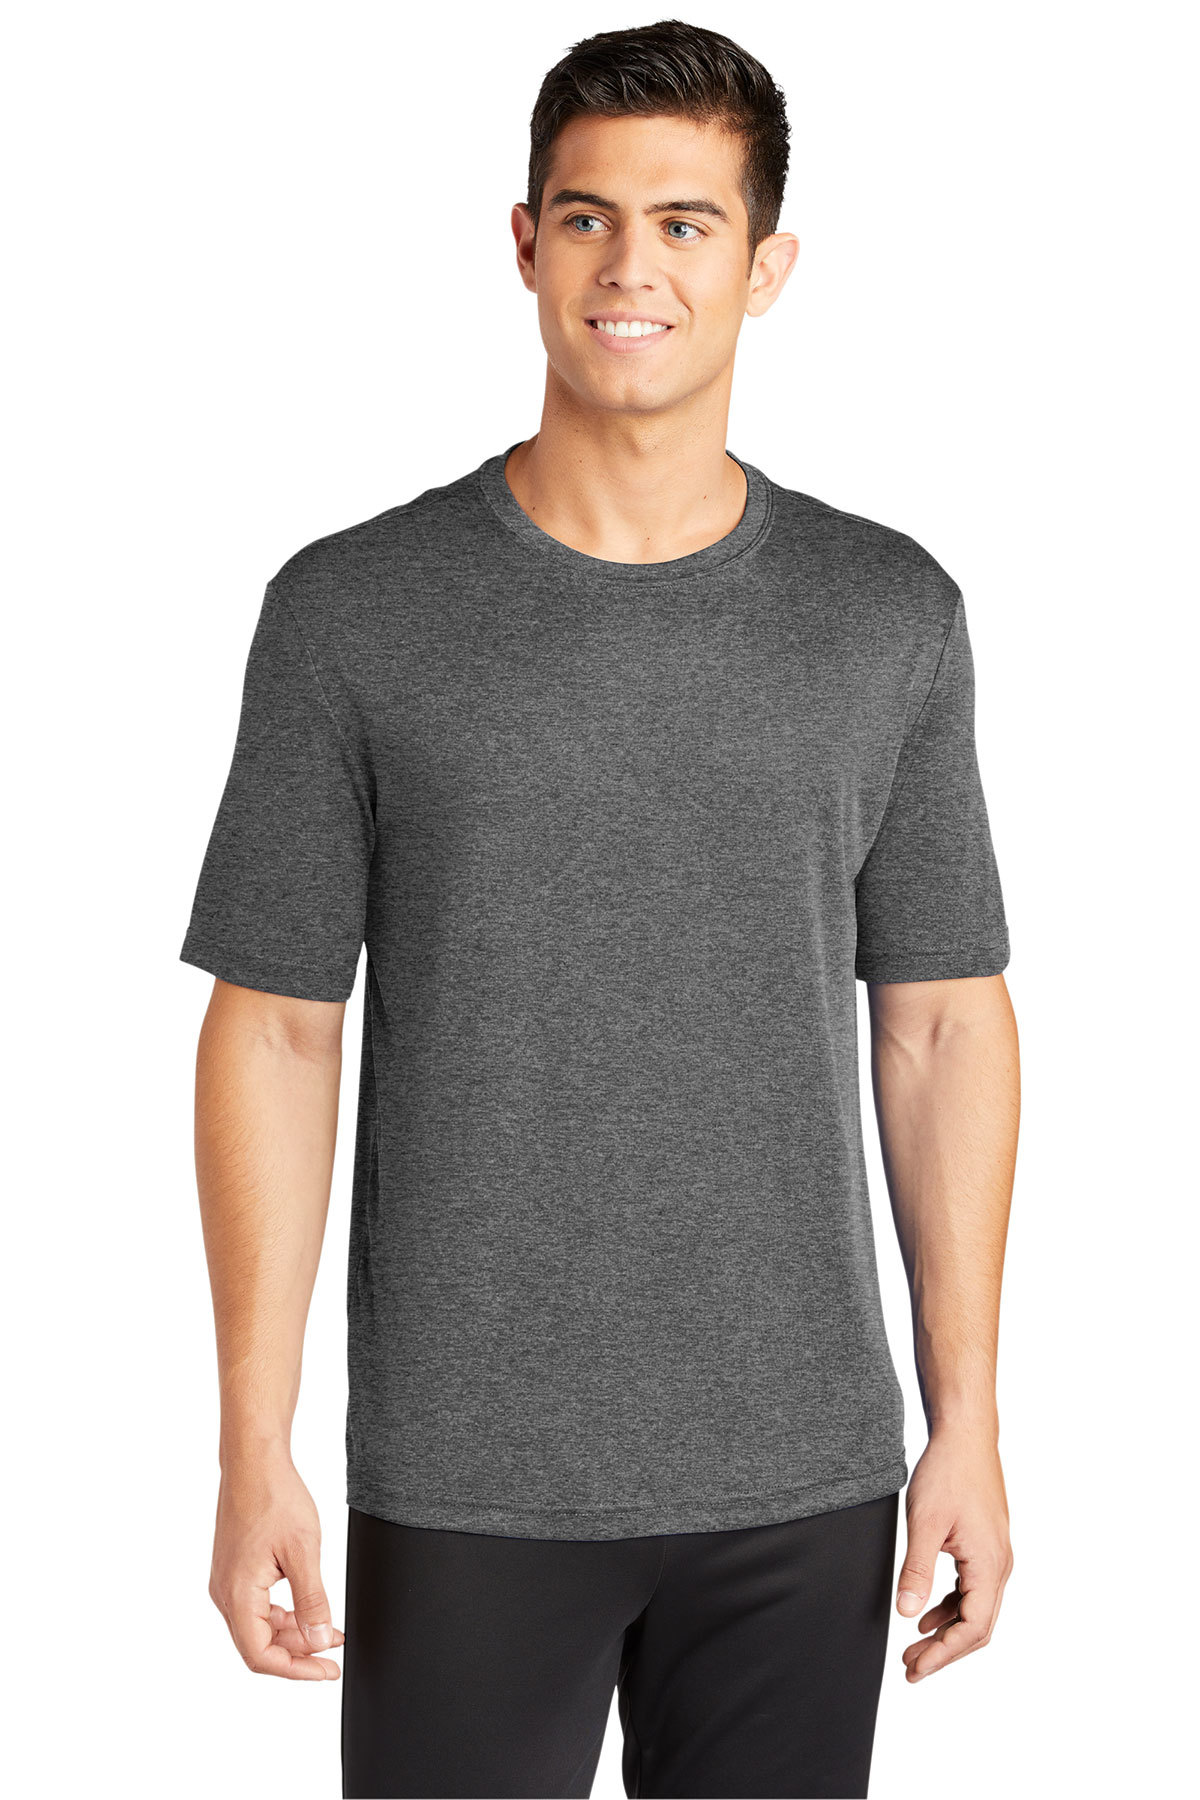 click to view Iron Grey Heather